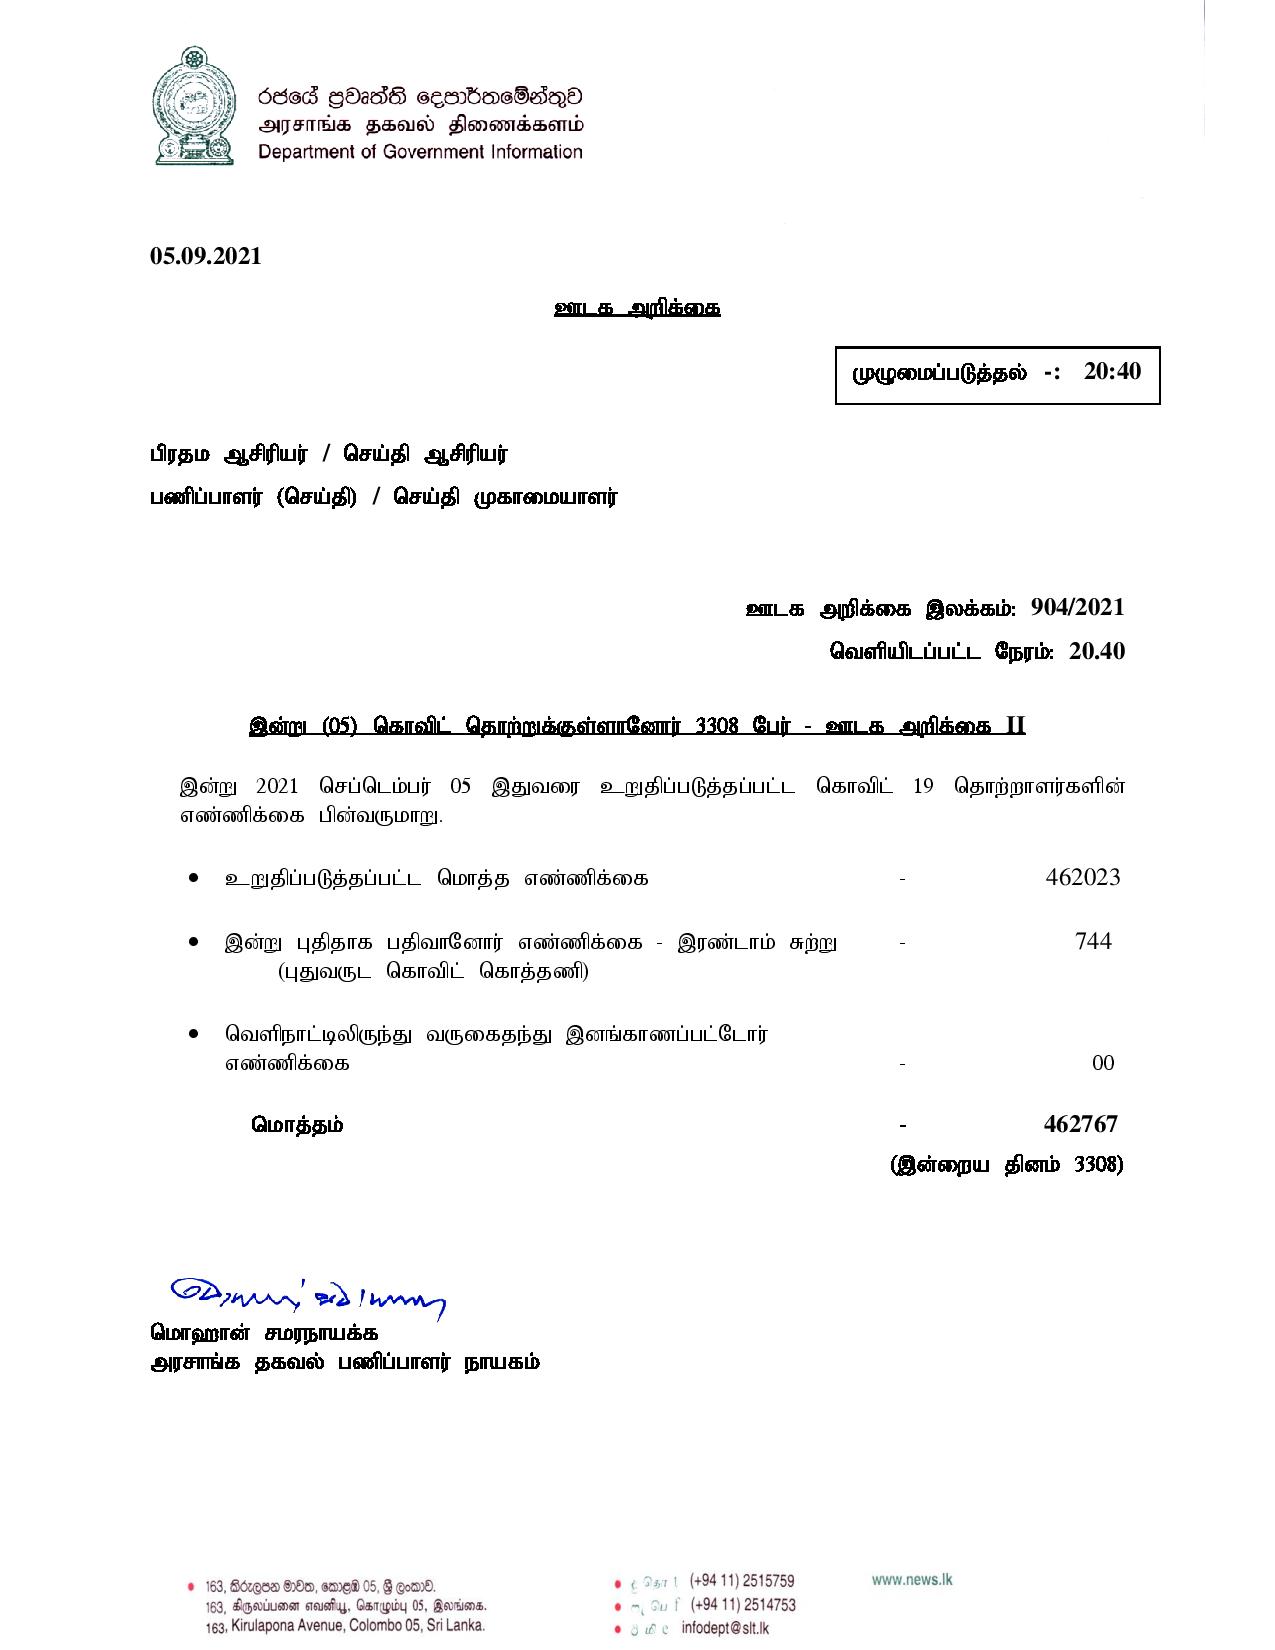 Release No 904Tamil page 001